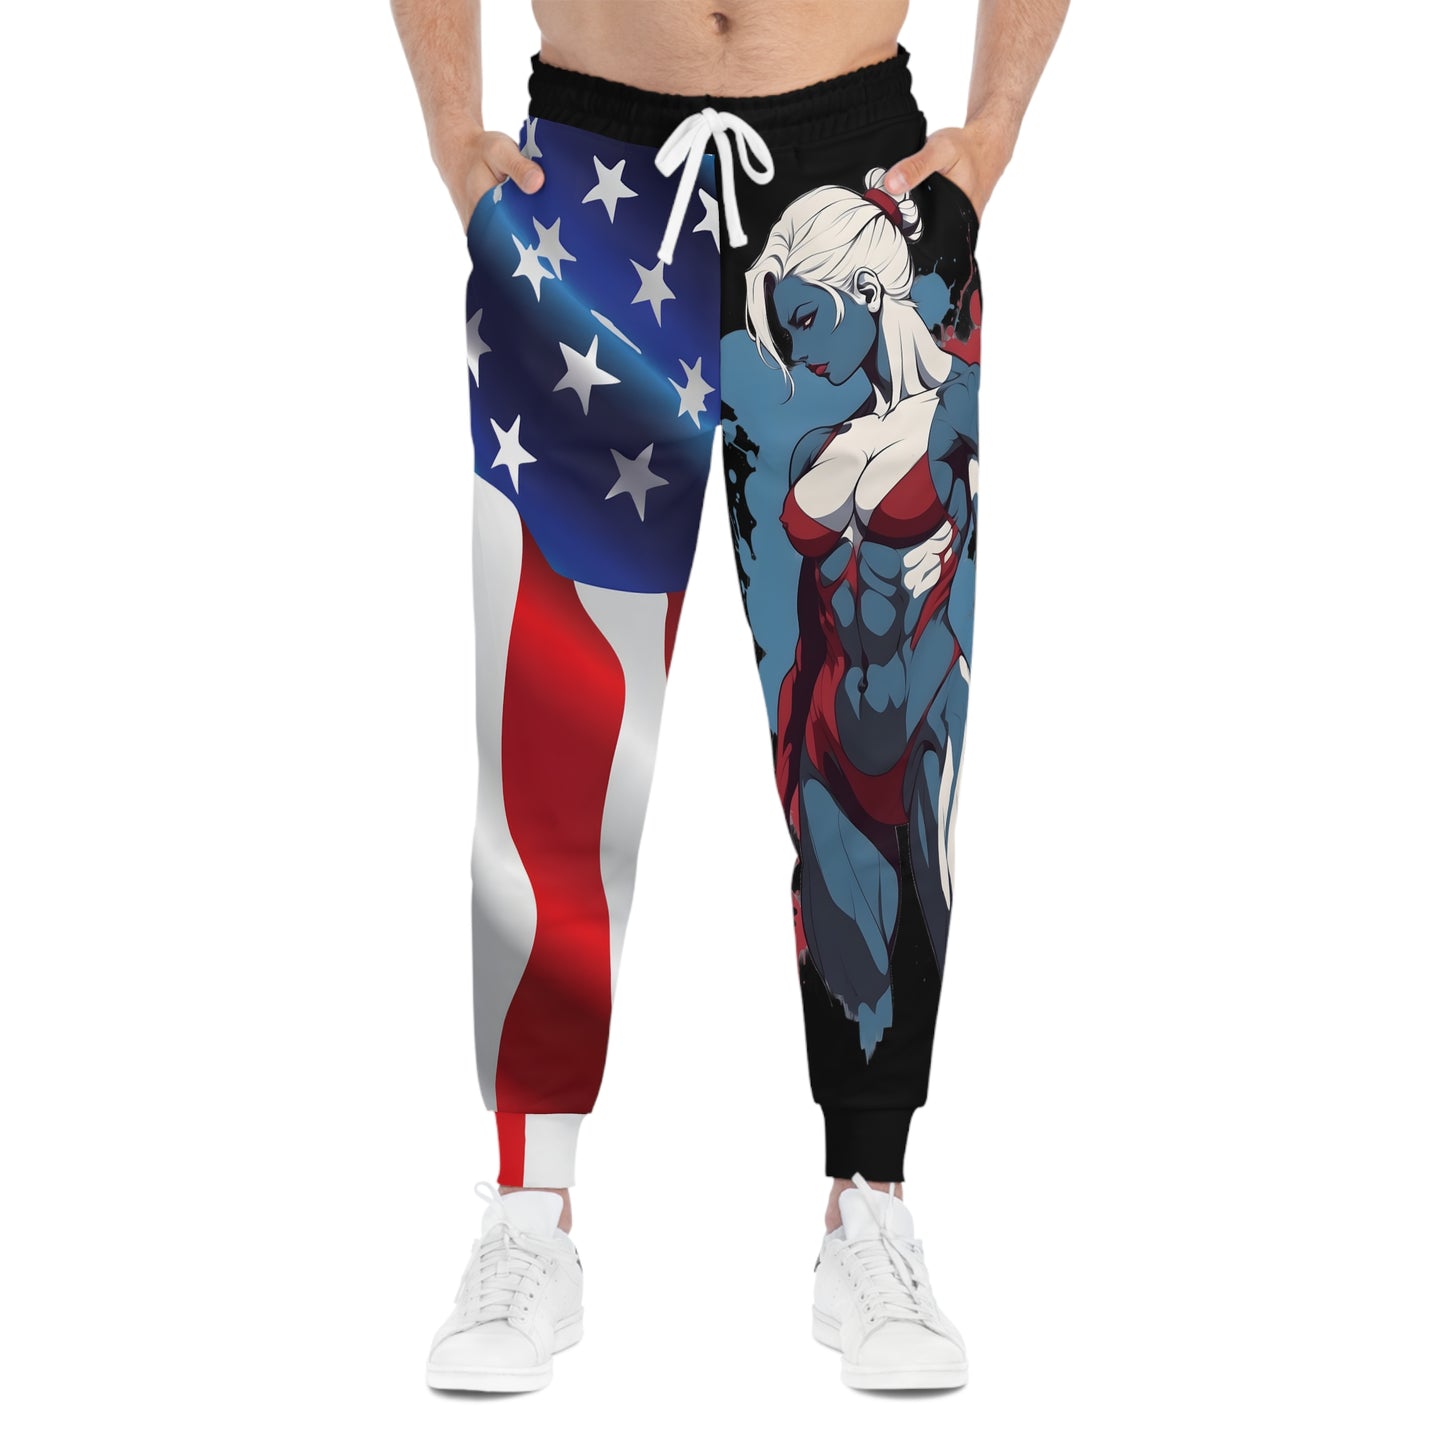 Kǎtōng Piàn - Prized Fighter Collection - America - 008 - Athletic Joggers